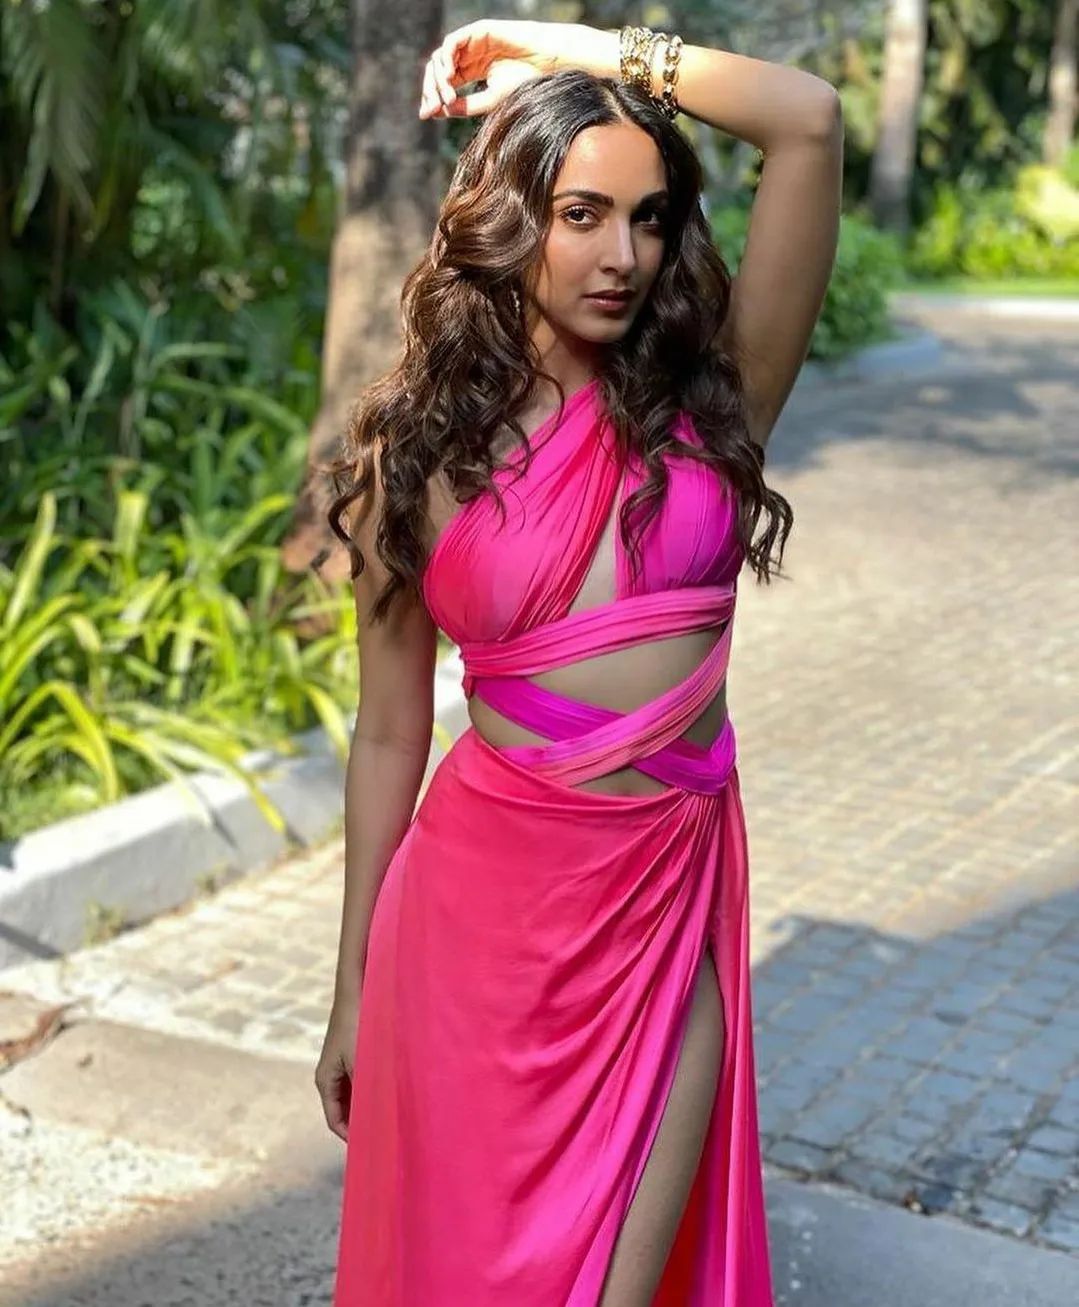 Can’t Stop Swooning Over These Bollywood Actresses Who Are Acing Barbie Fashion